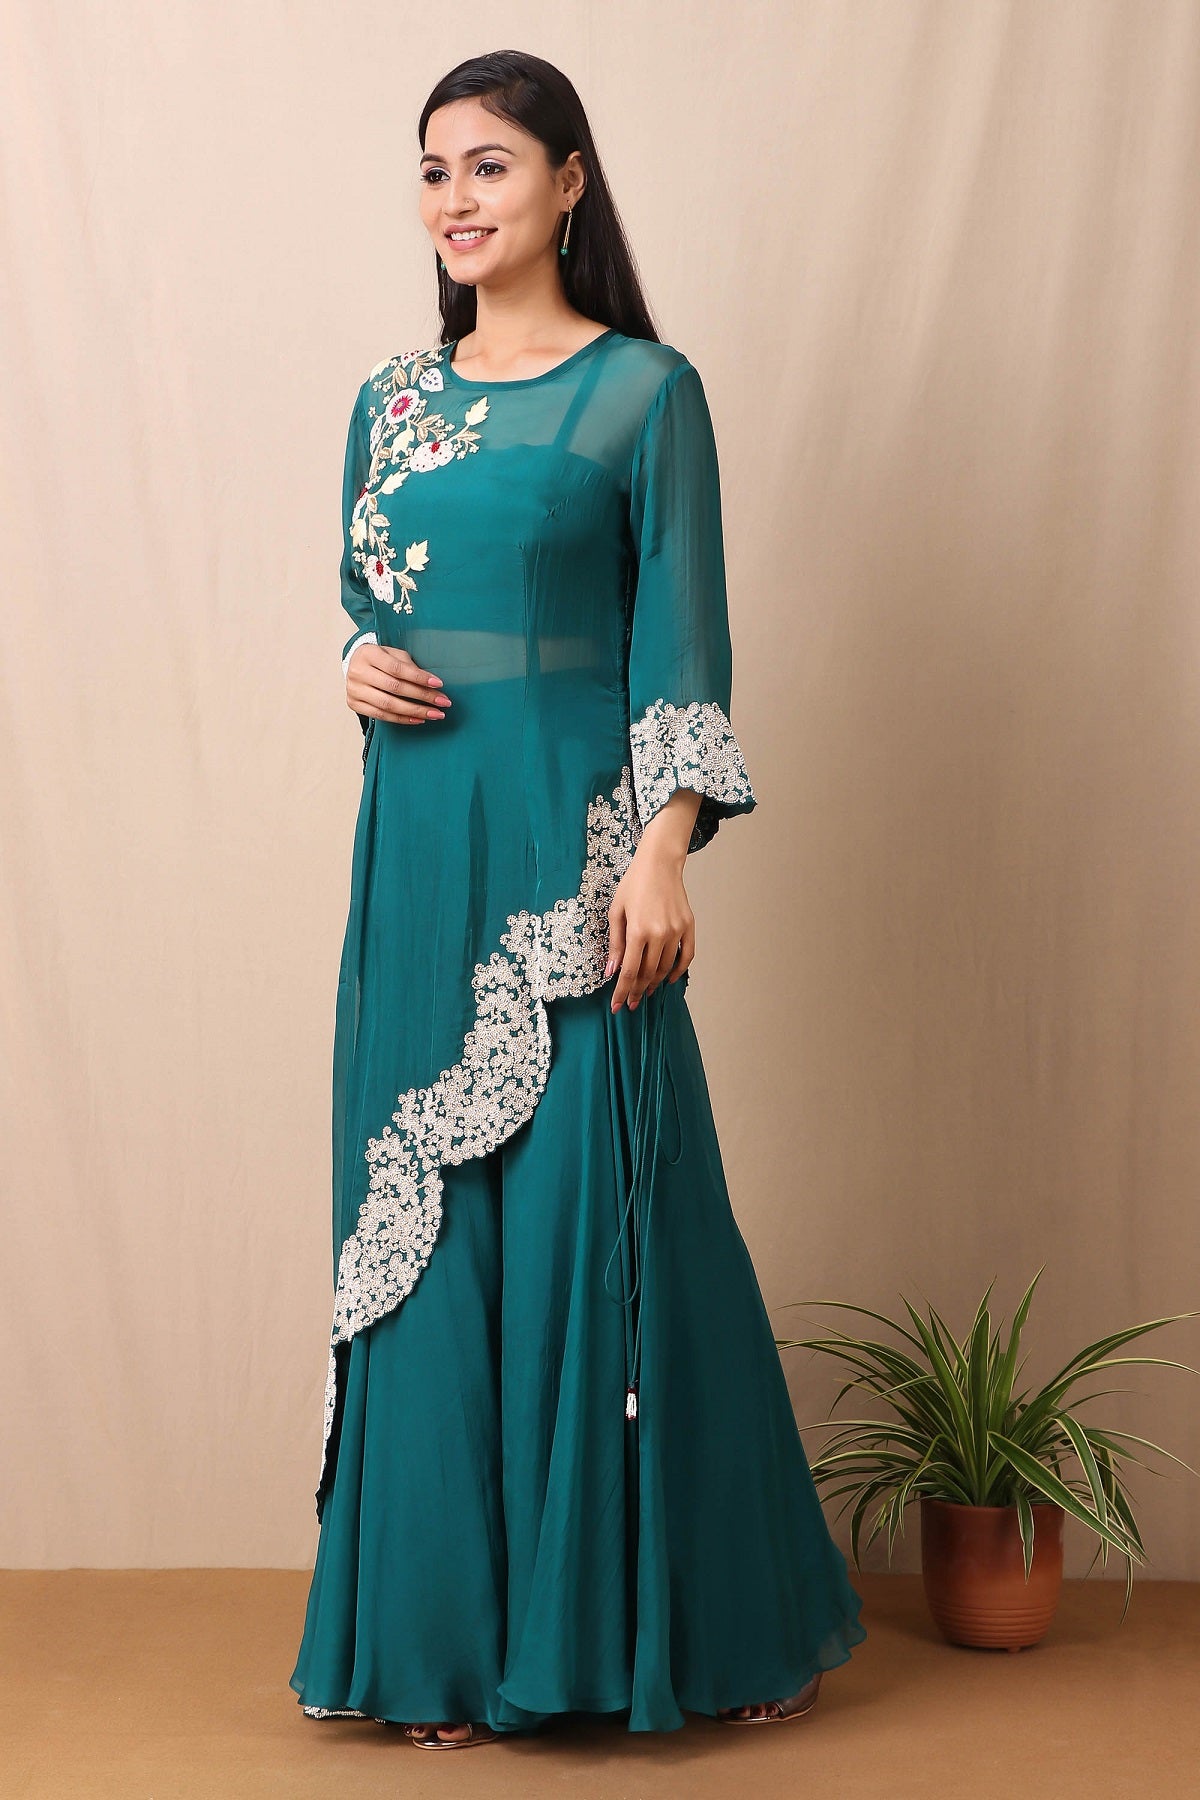 Shop beautiful set of tabby silk green cape style kurta and sharara with thread and pearl work in floral pattern from Pure Elegance. Complete the look by wearing statement jewellery and heels. Light up your ethnic collection of clothing with this kurta sharara set from Pure elegance. It's woven from a fabric that's airy and uber soft against your skin  Pair it up with statement jewellery to complete your look from Pure Elegance Indian clothing store in USA online now.-Side view.